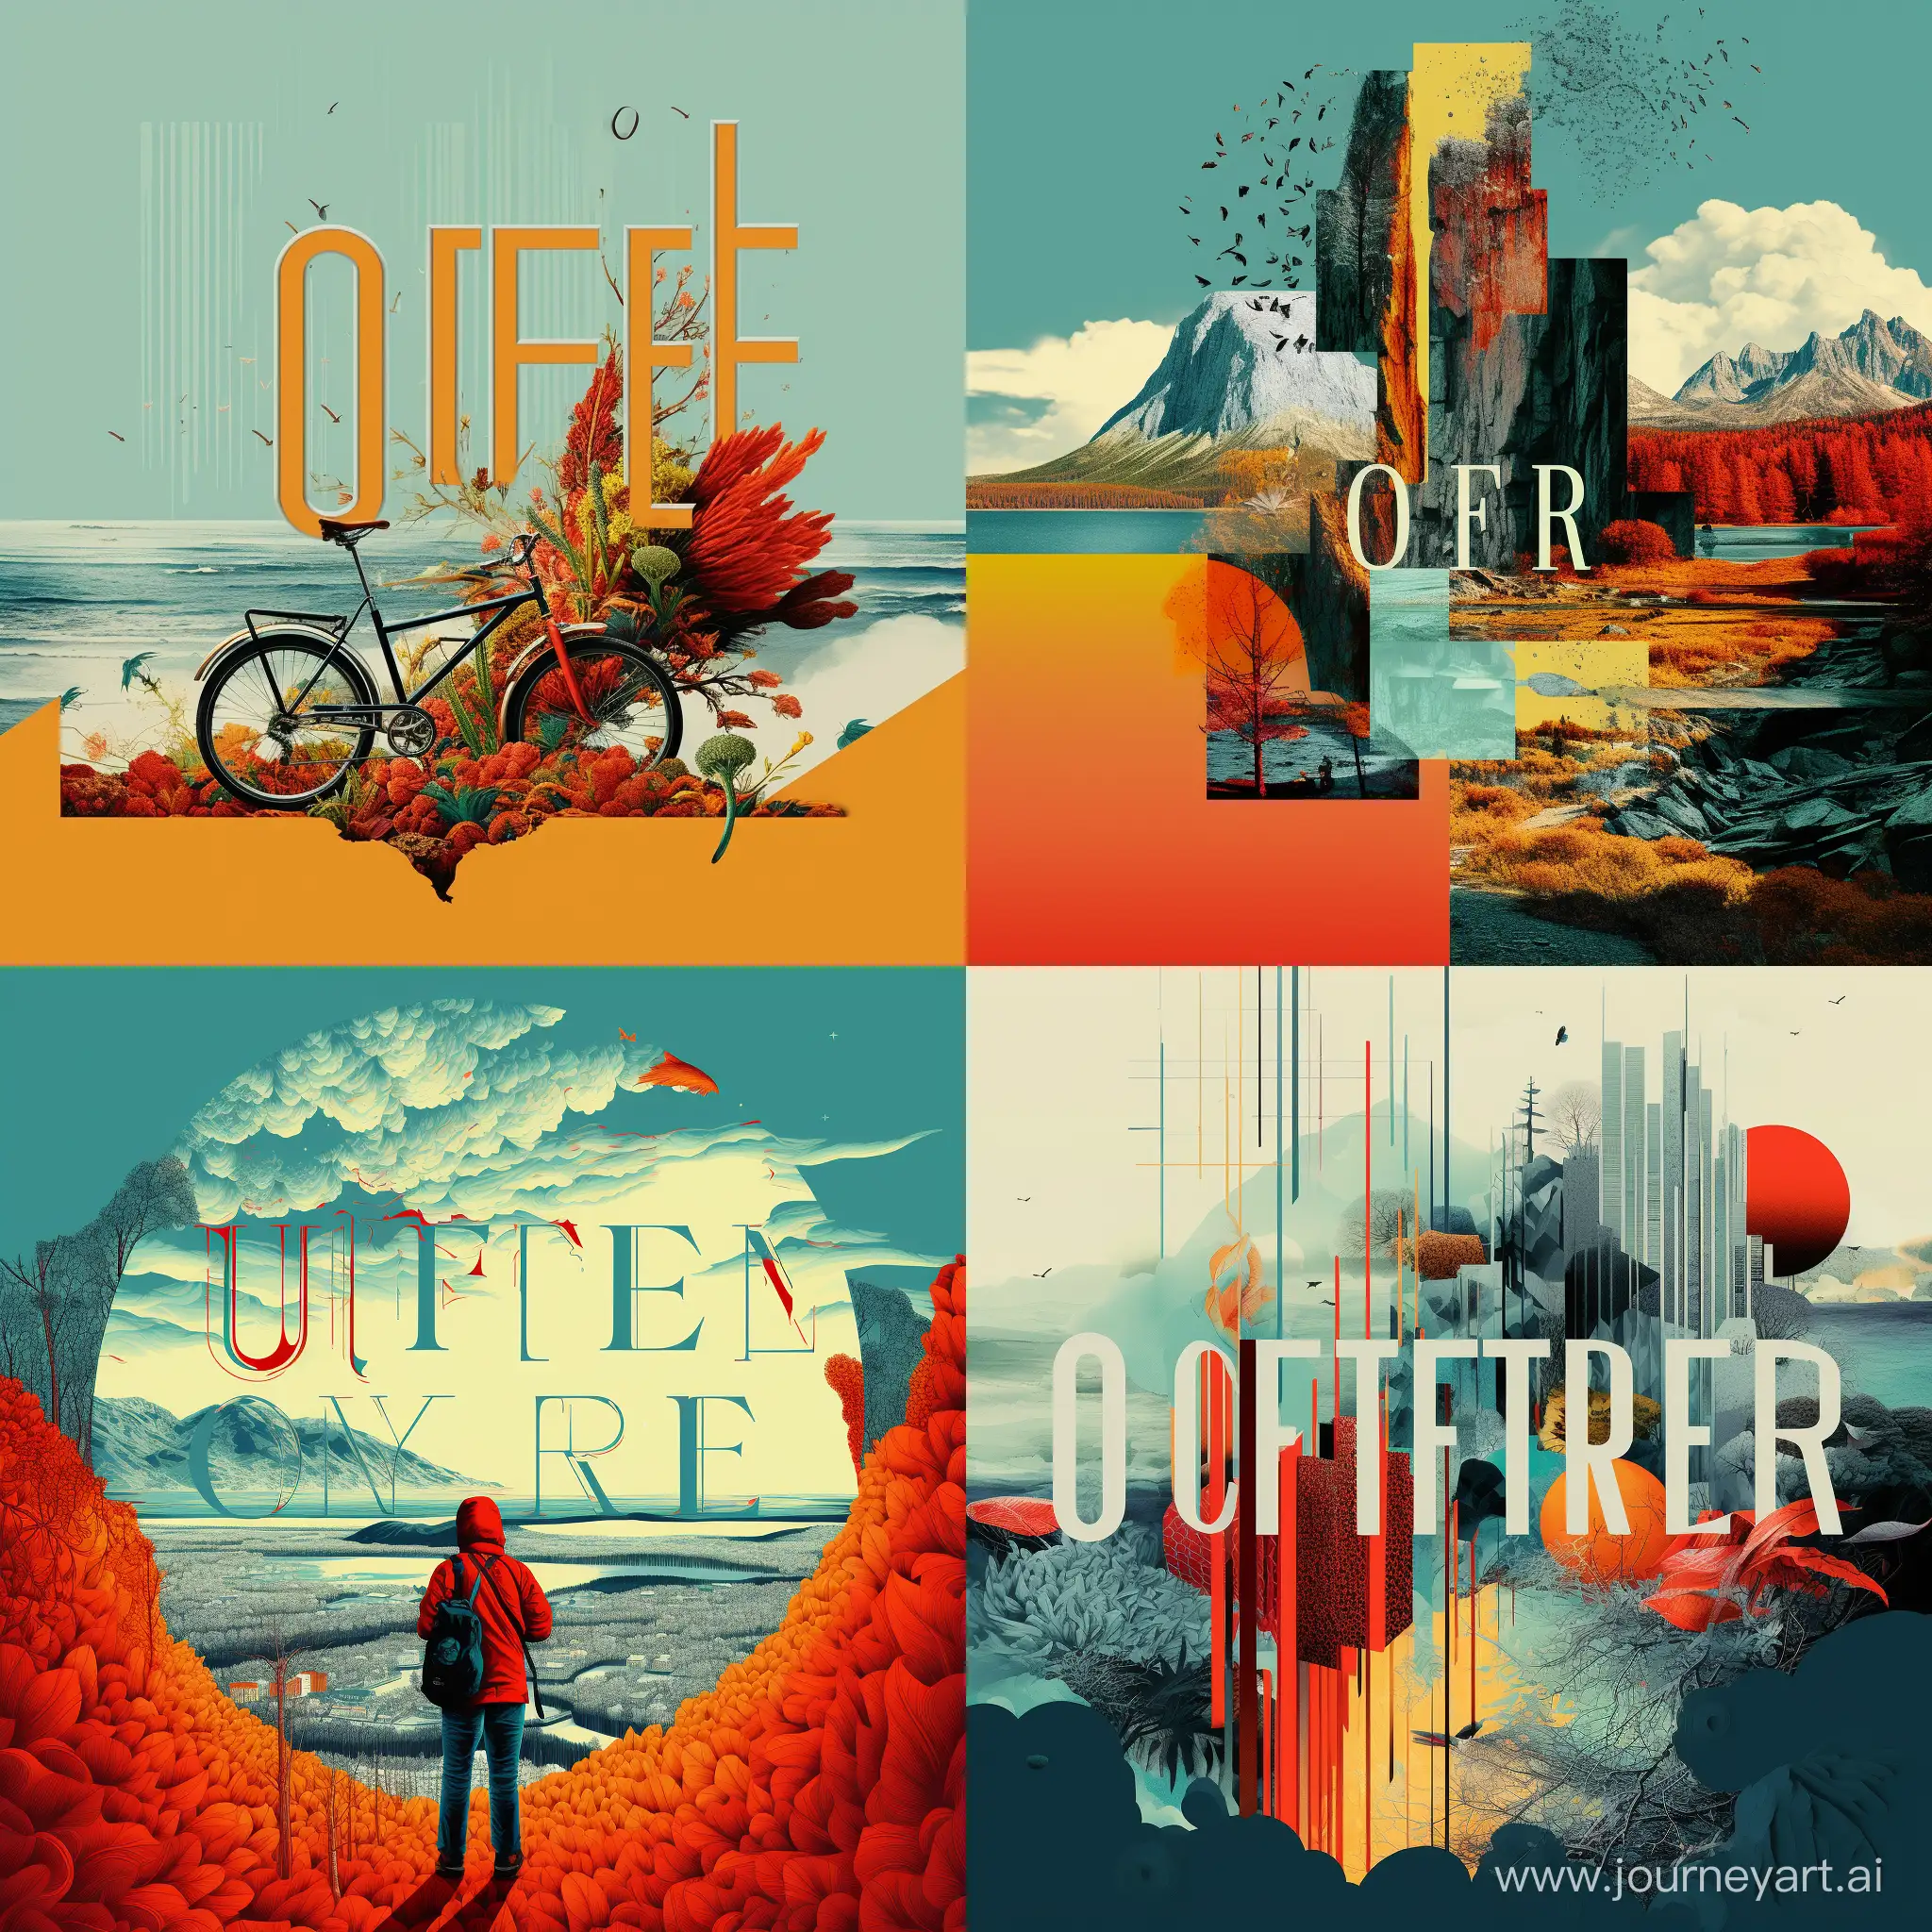 Create a visually compelling digital artwork using the words 'OFFER.' Each word should be distinctly and creatively presented within the composition. Explore unique visual treatments for each word, such as playful typography, contrasting colors, or imaginative textures, ensuring that their clarity is a focal point. The overall image should seamlessly integrate these five words into a cohesive and visually stunning scene. Emphasize clarity and creativity in the presentation, making each word a clear and captivating element within the composition.